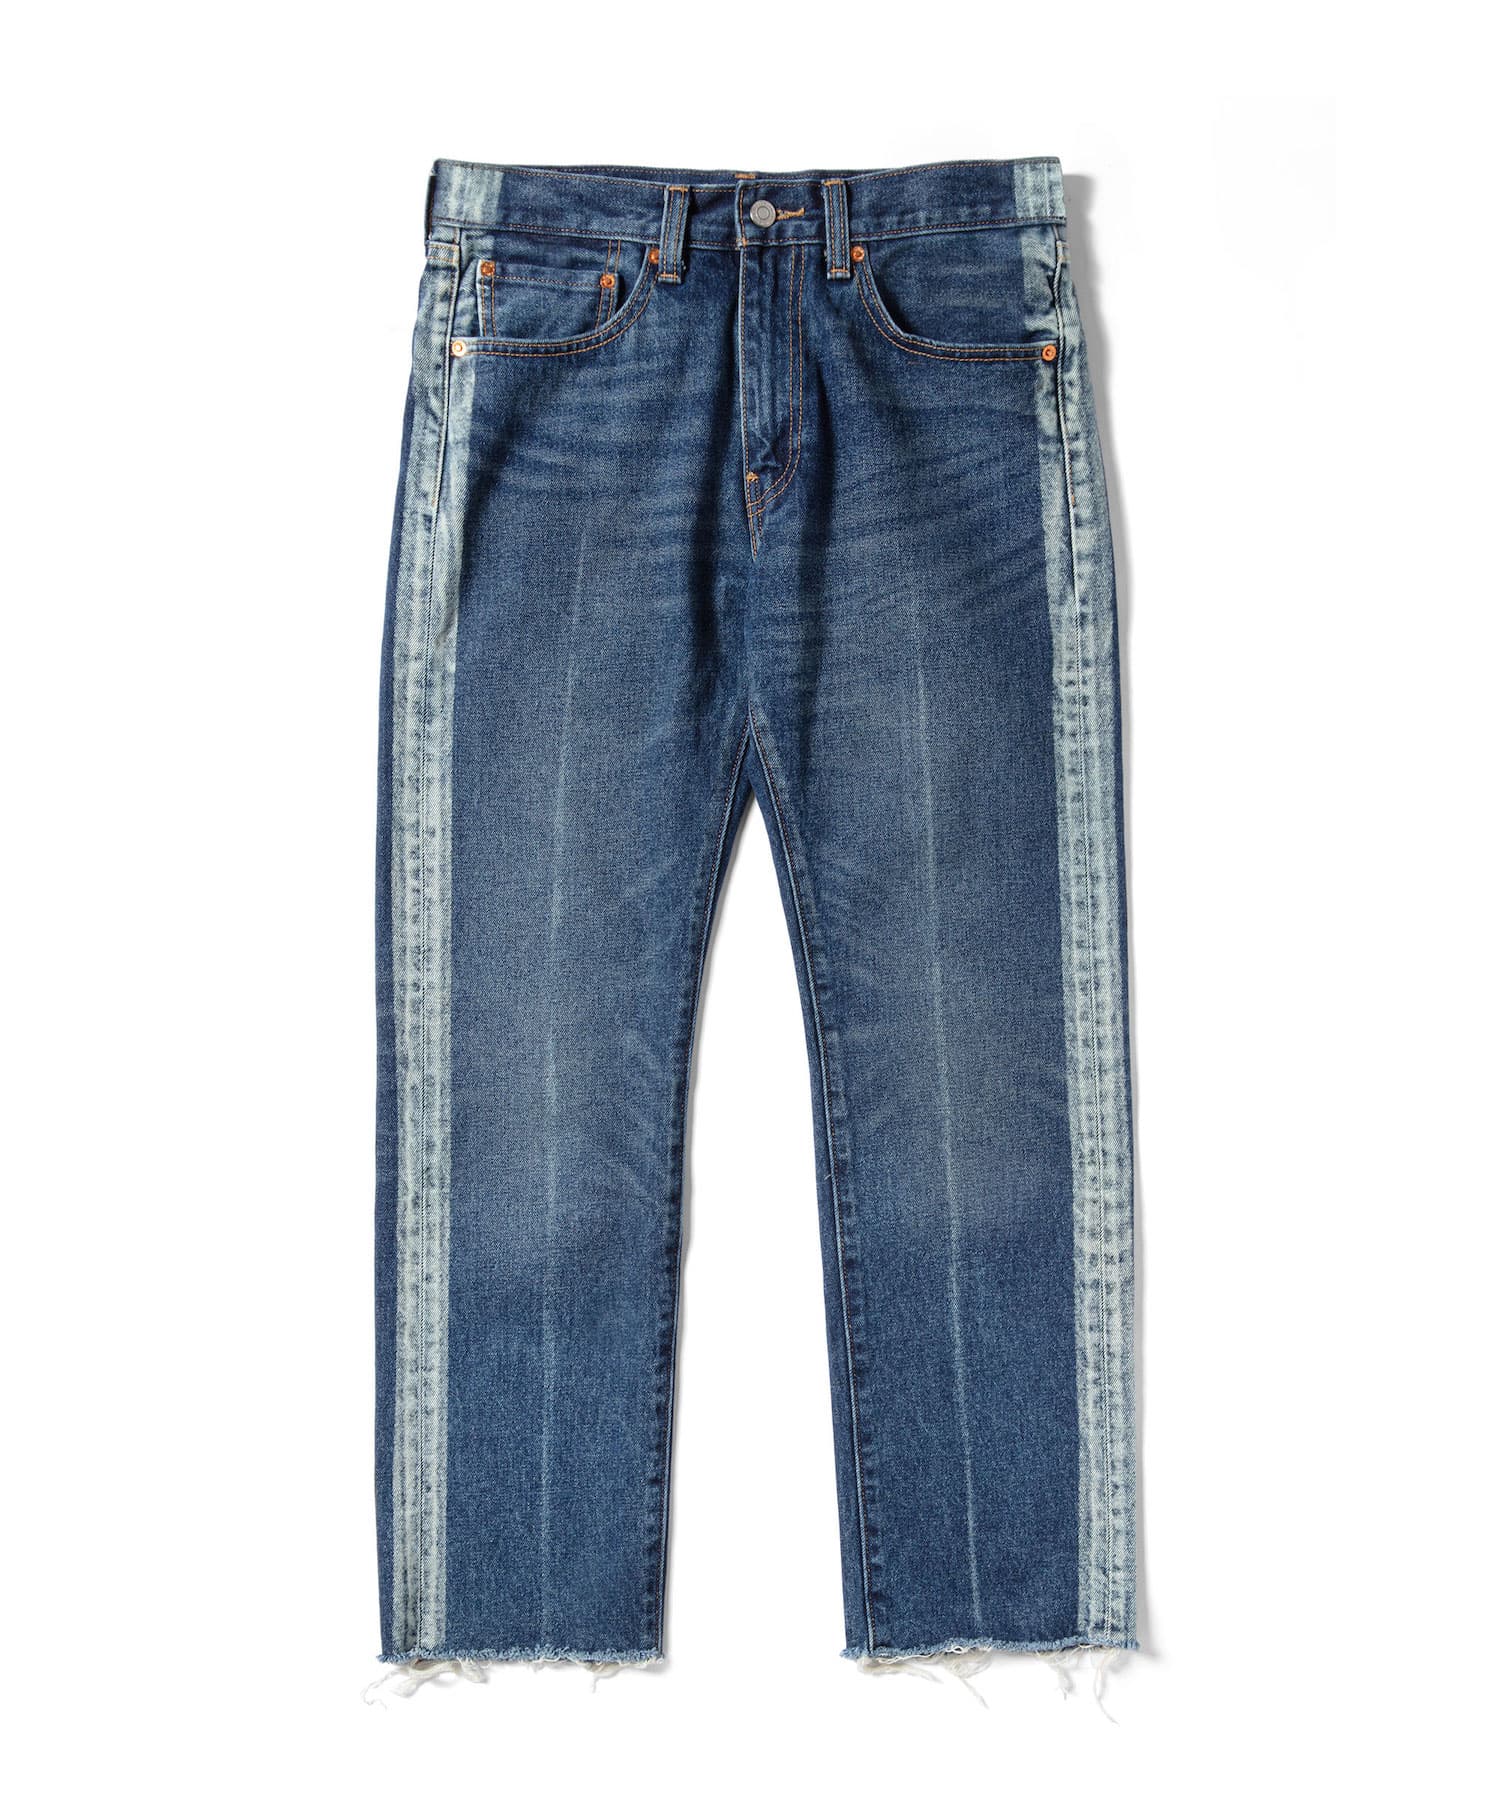 Levi's DAD JEAN Customized by シトウレイ 新品 www.ctag.pt